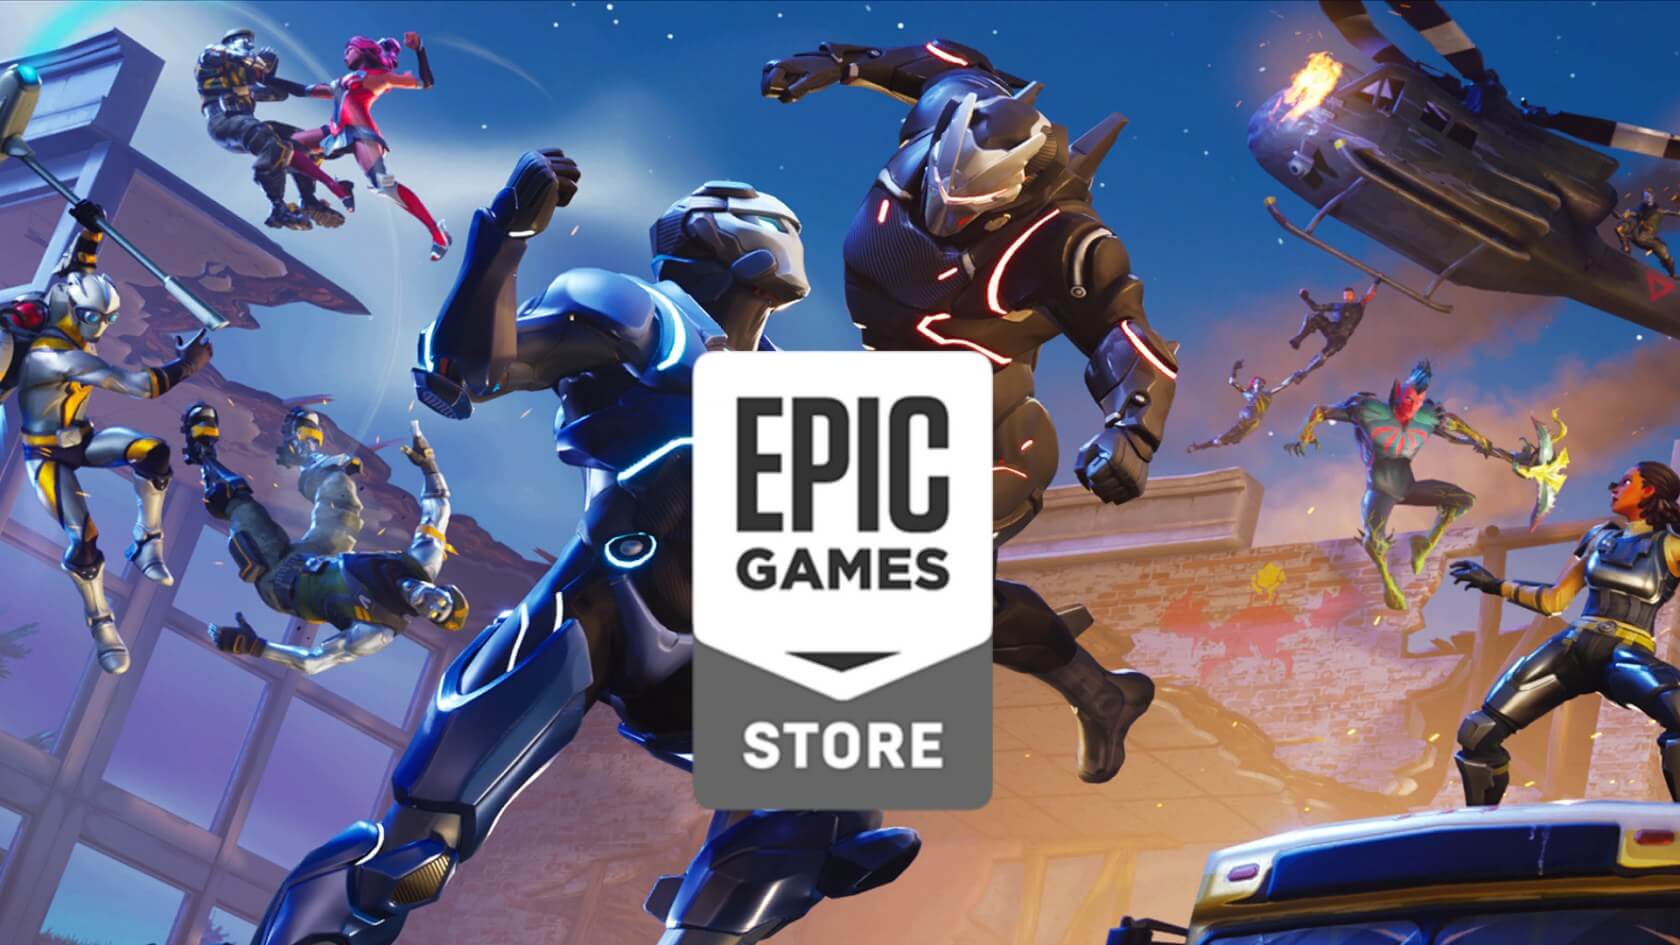 Reviews and wishlists are coming to the Epic Games Store